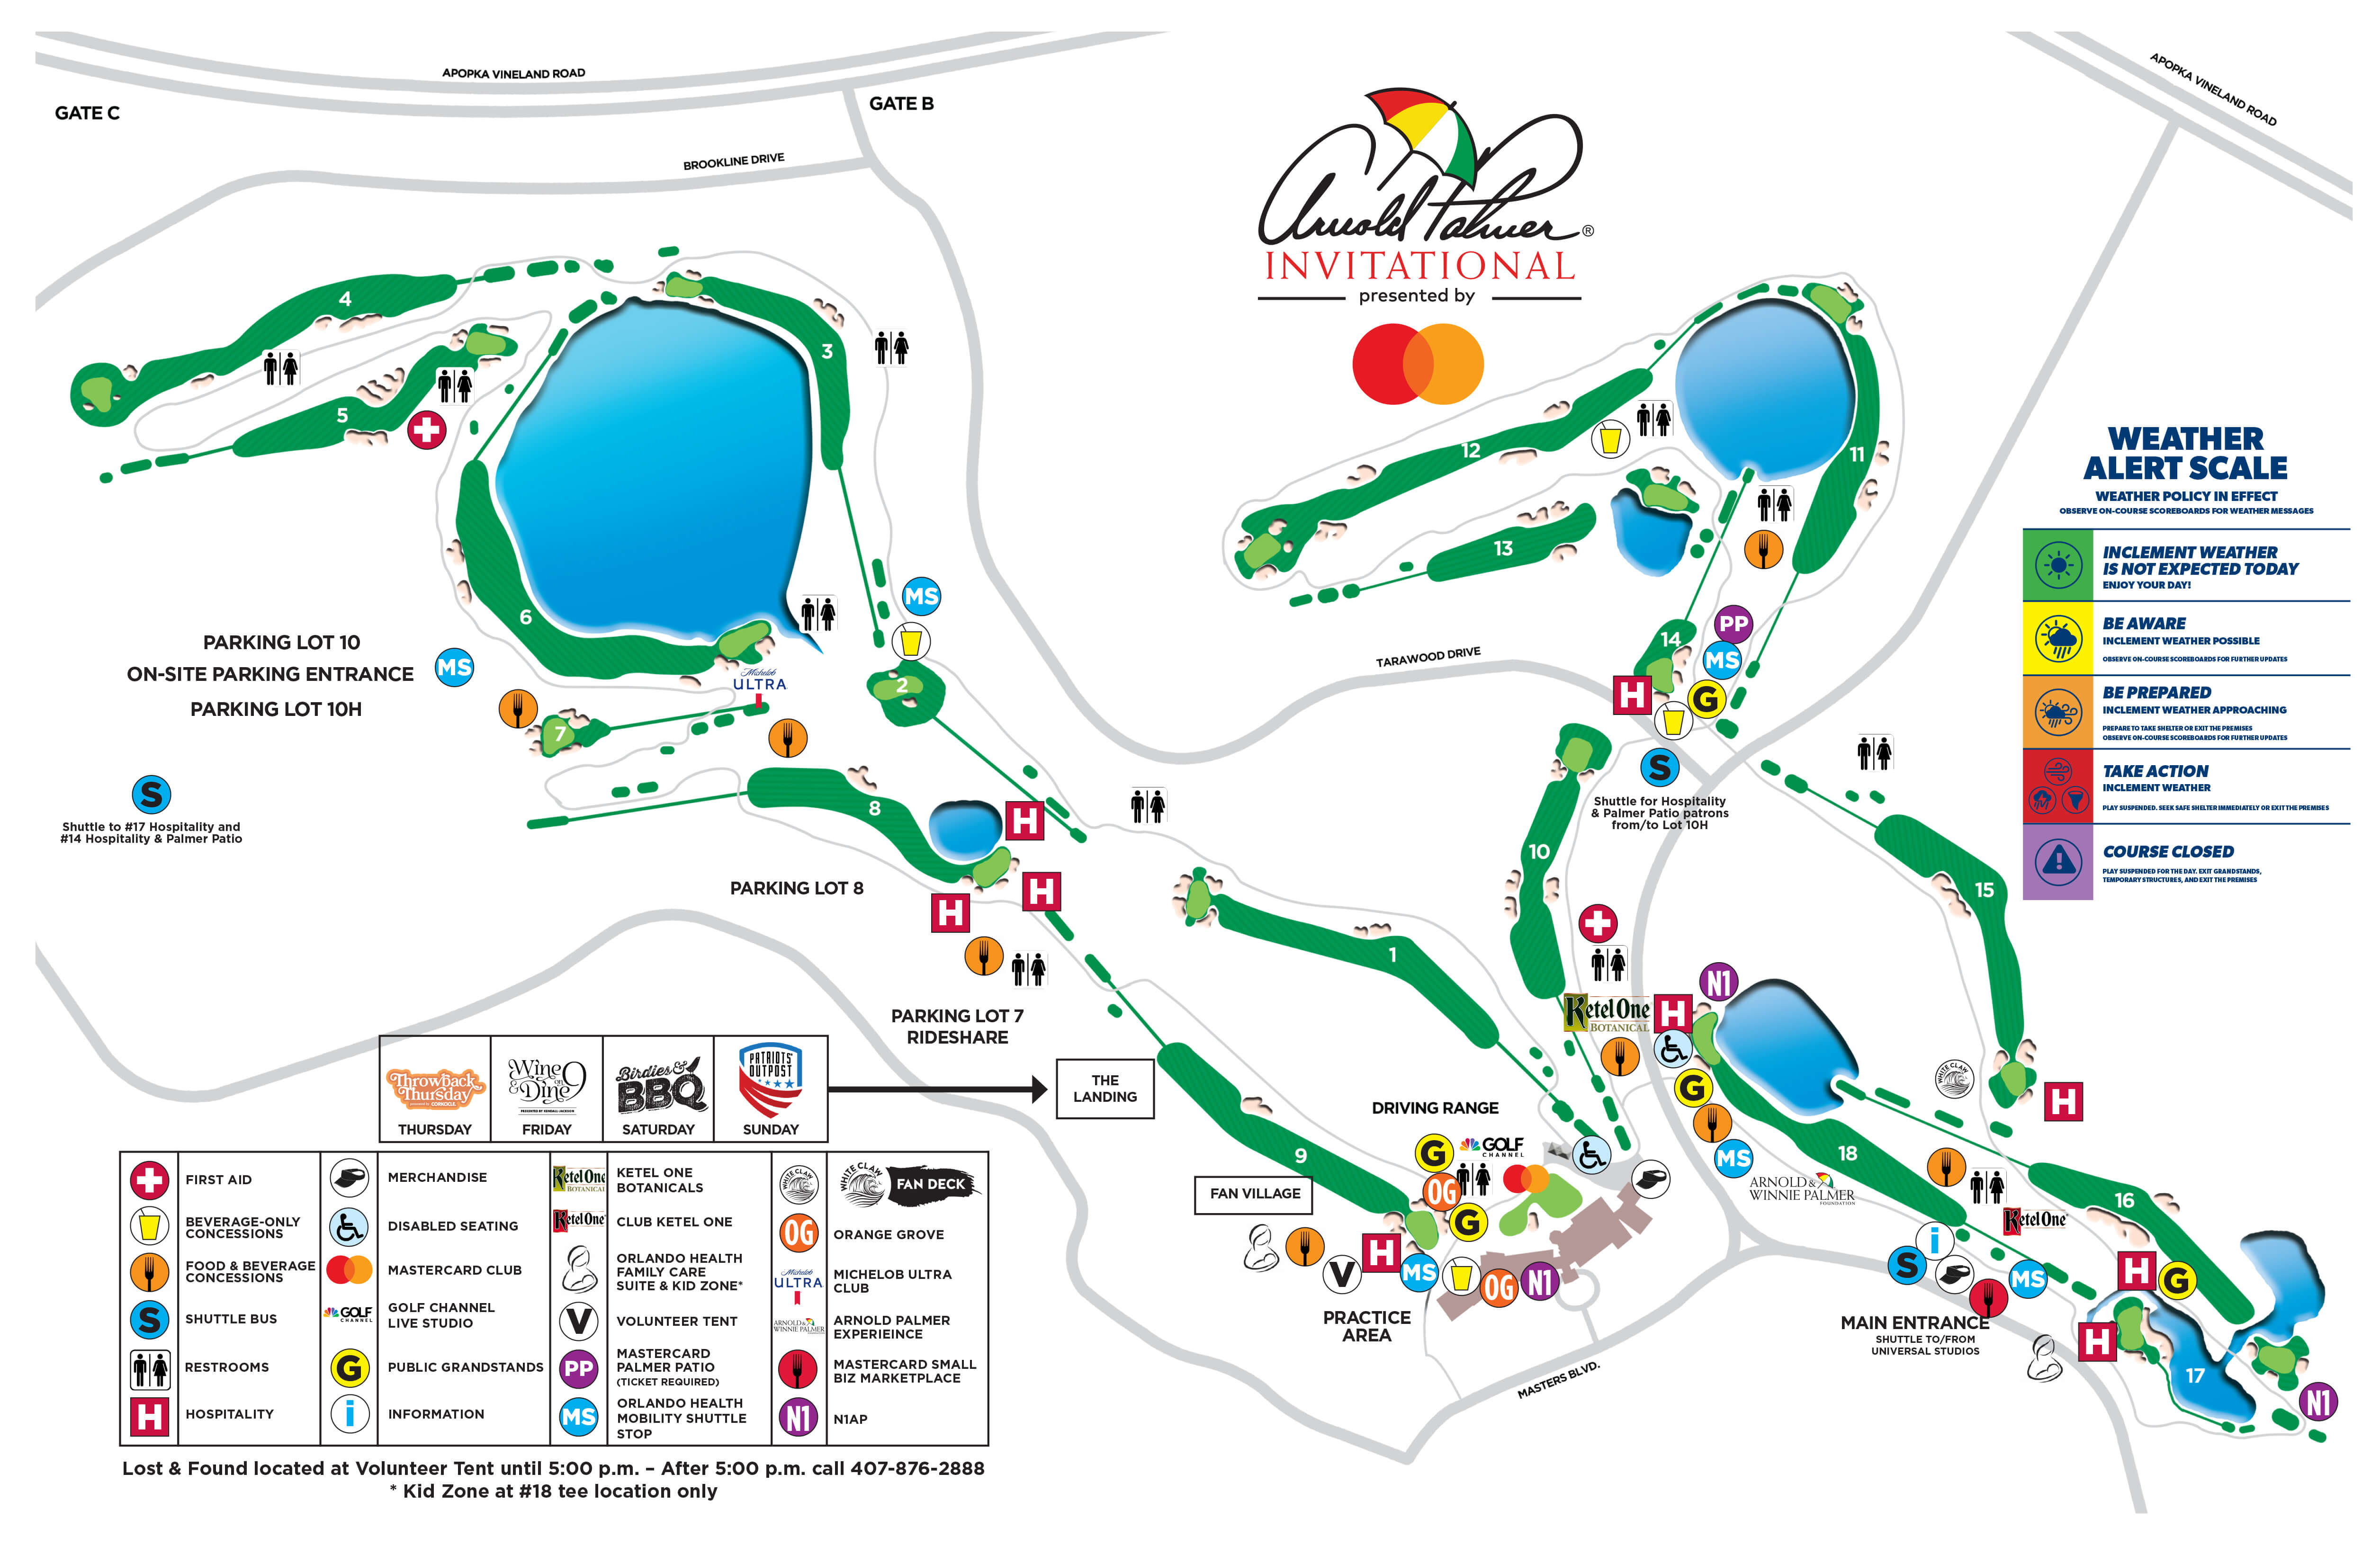 Arnold Palmer Invitational: a hole-by-hole guide to Bay Hill Club